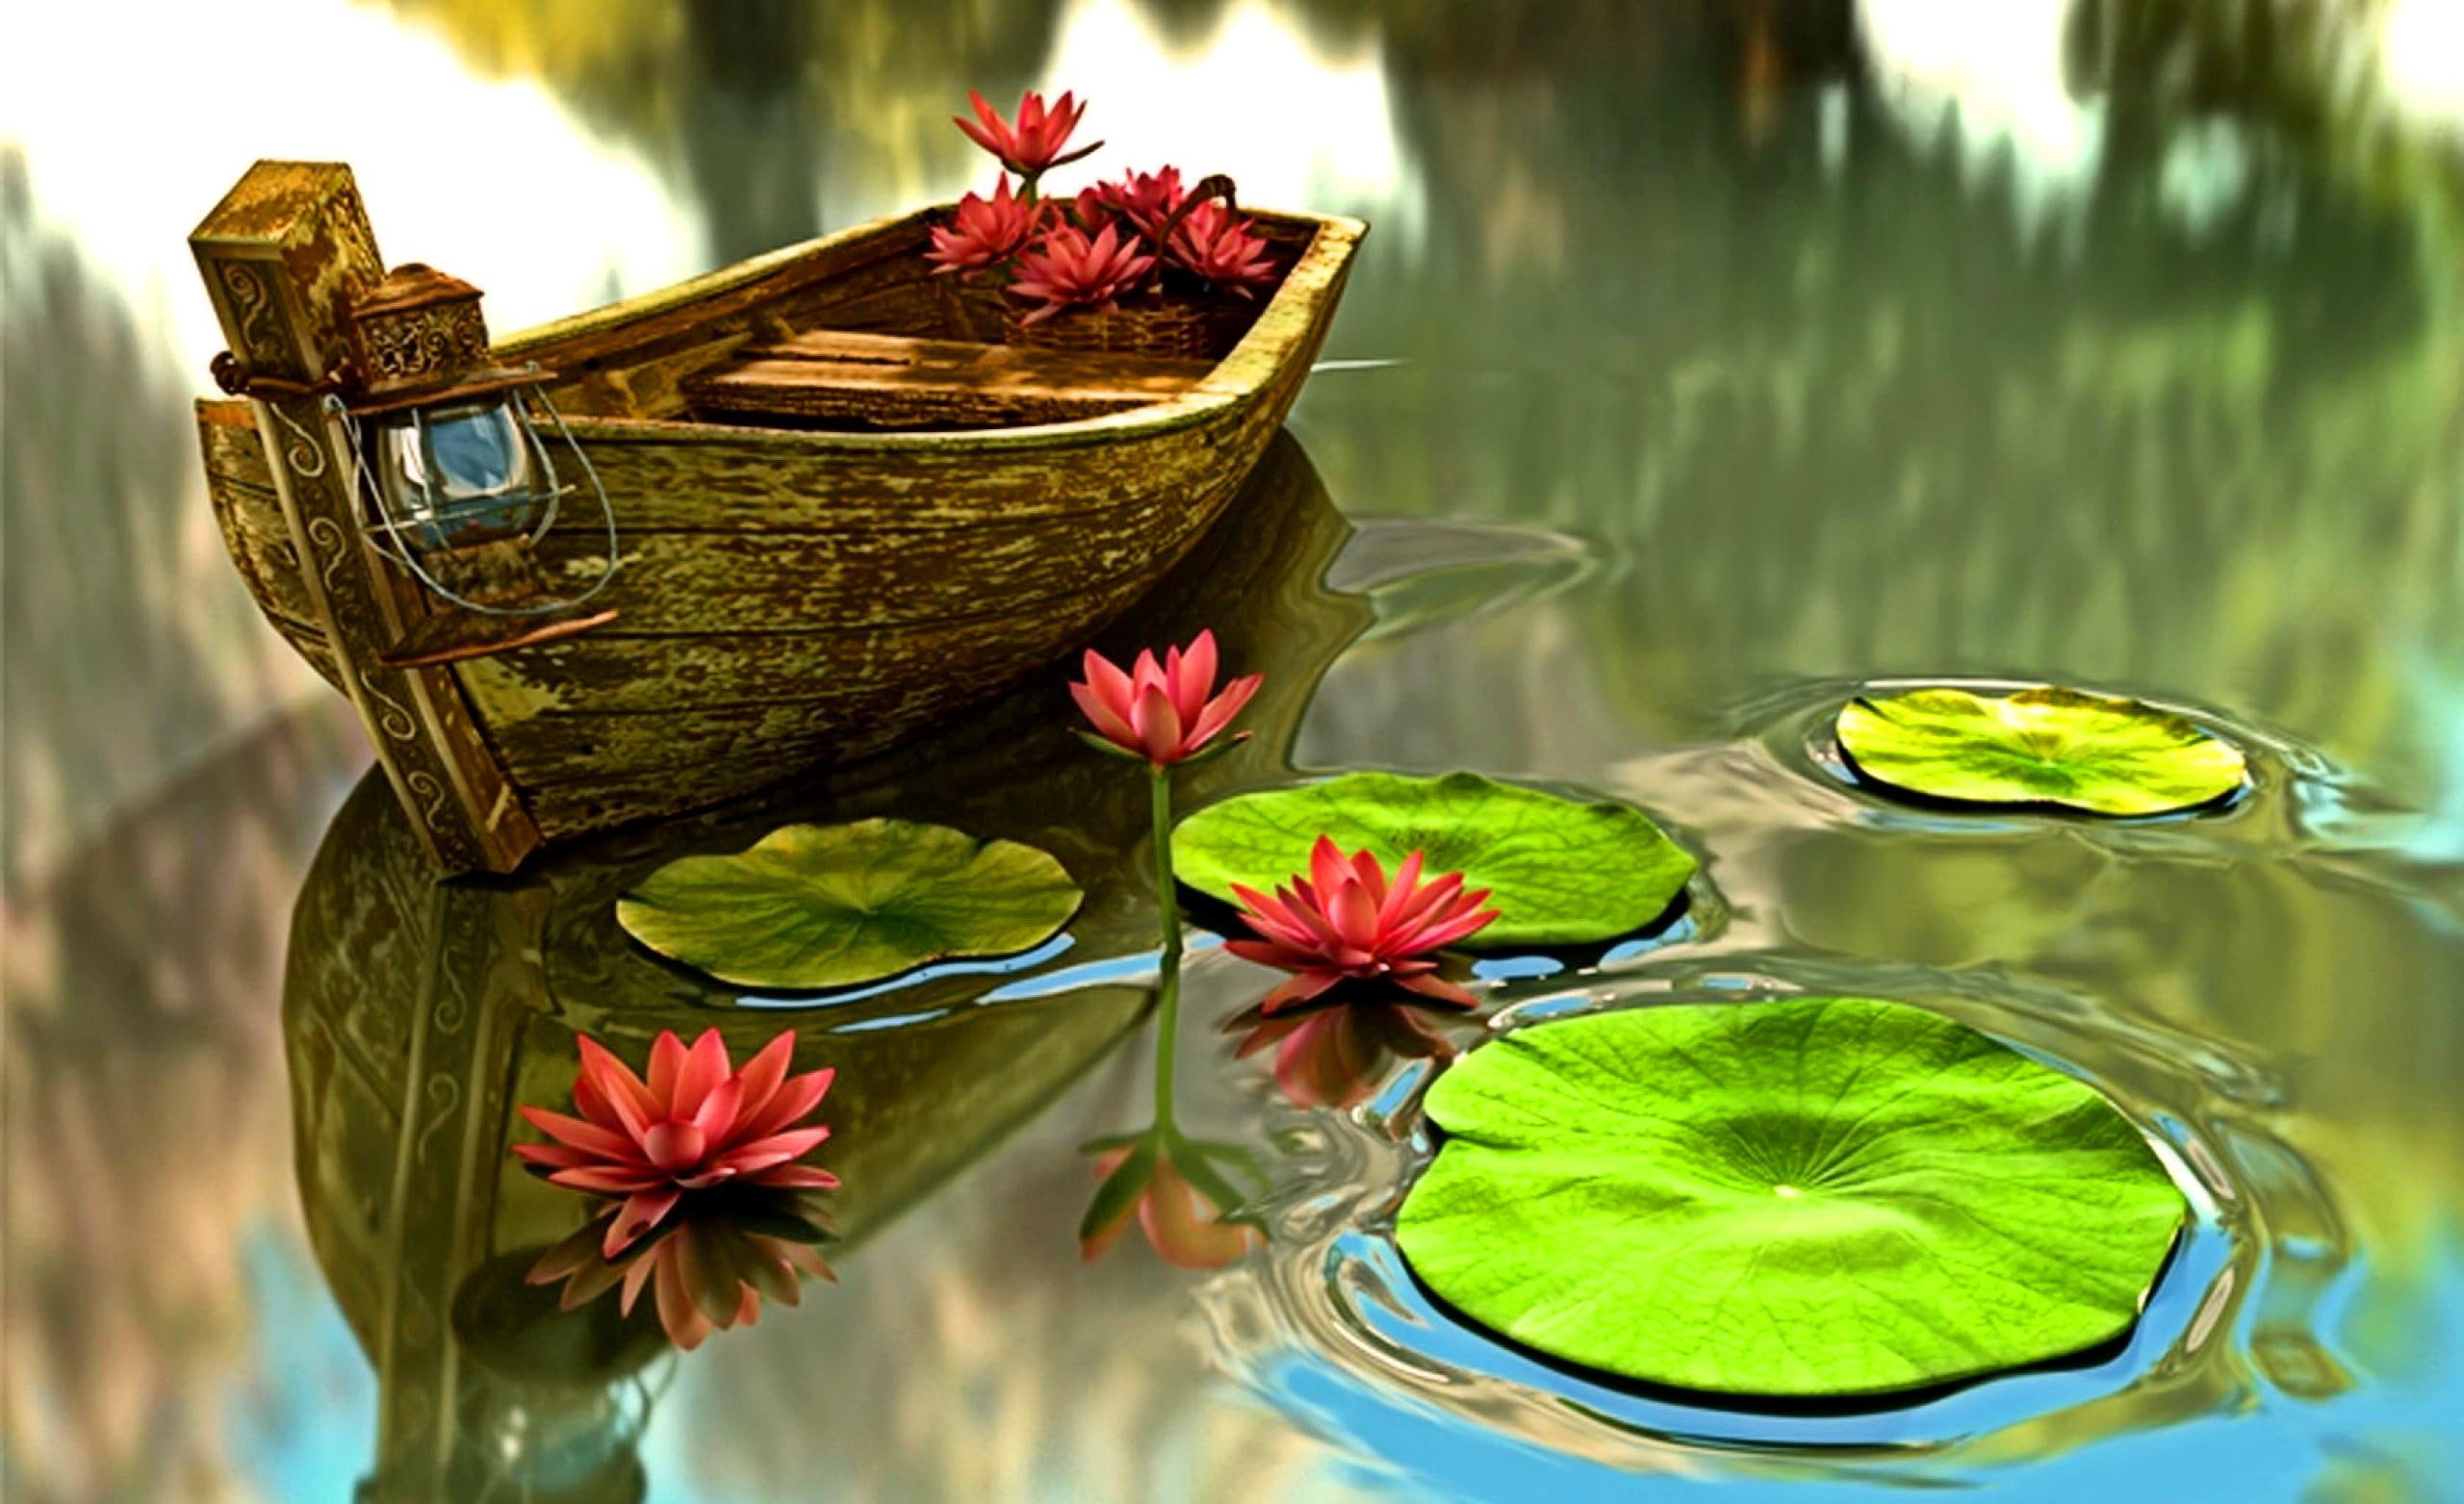 Boat In Water Lilies Pond, calm, lily pads, tranquility, lily pond